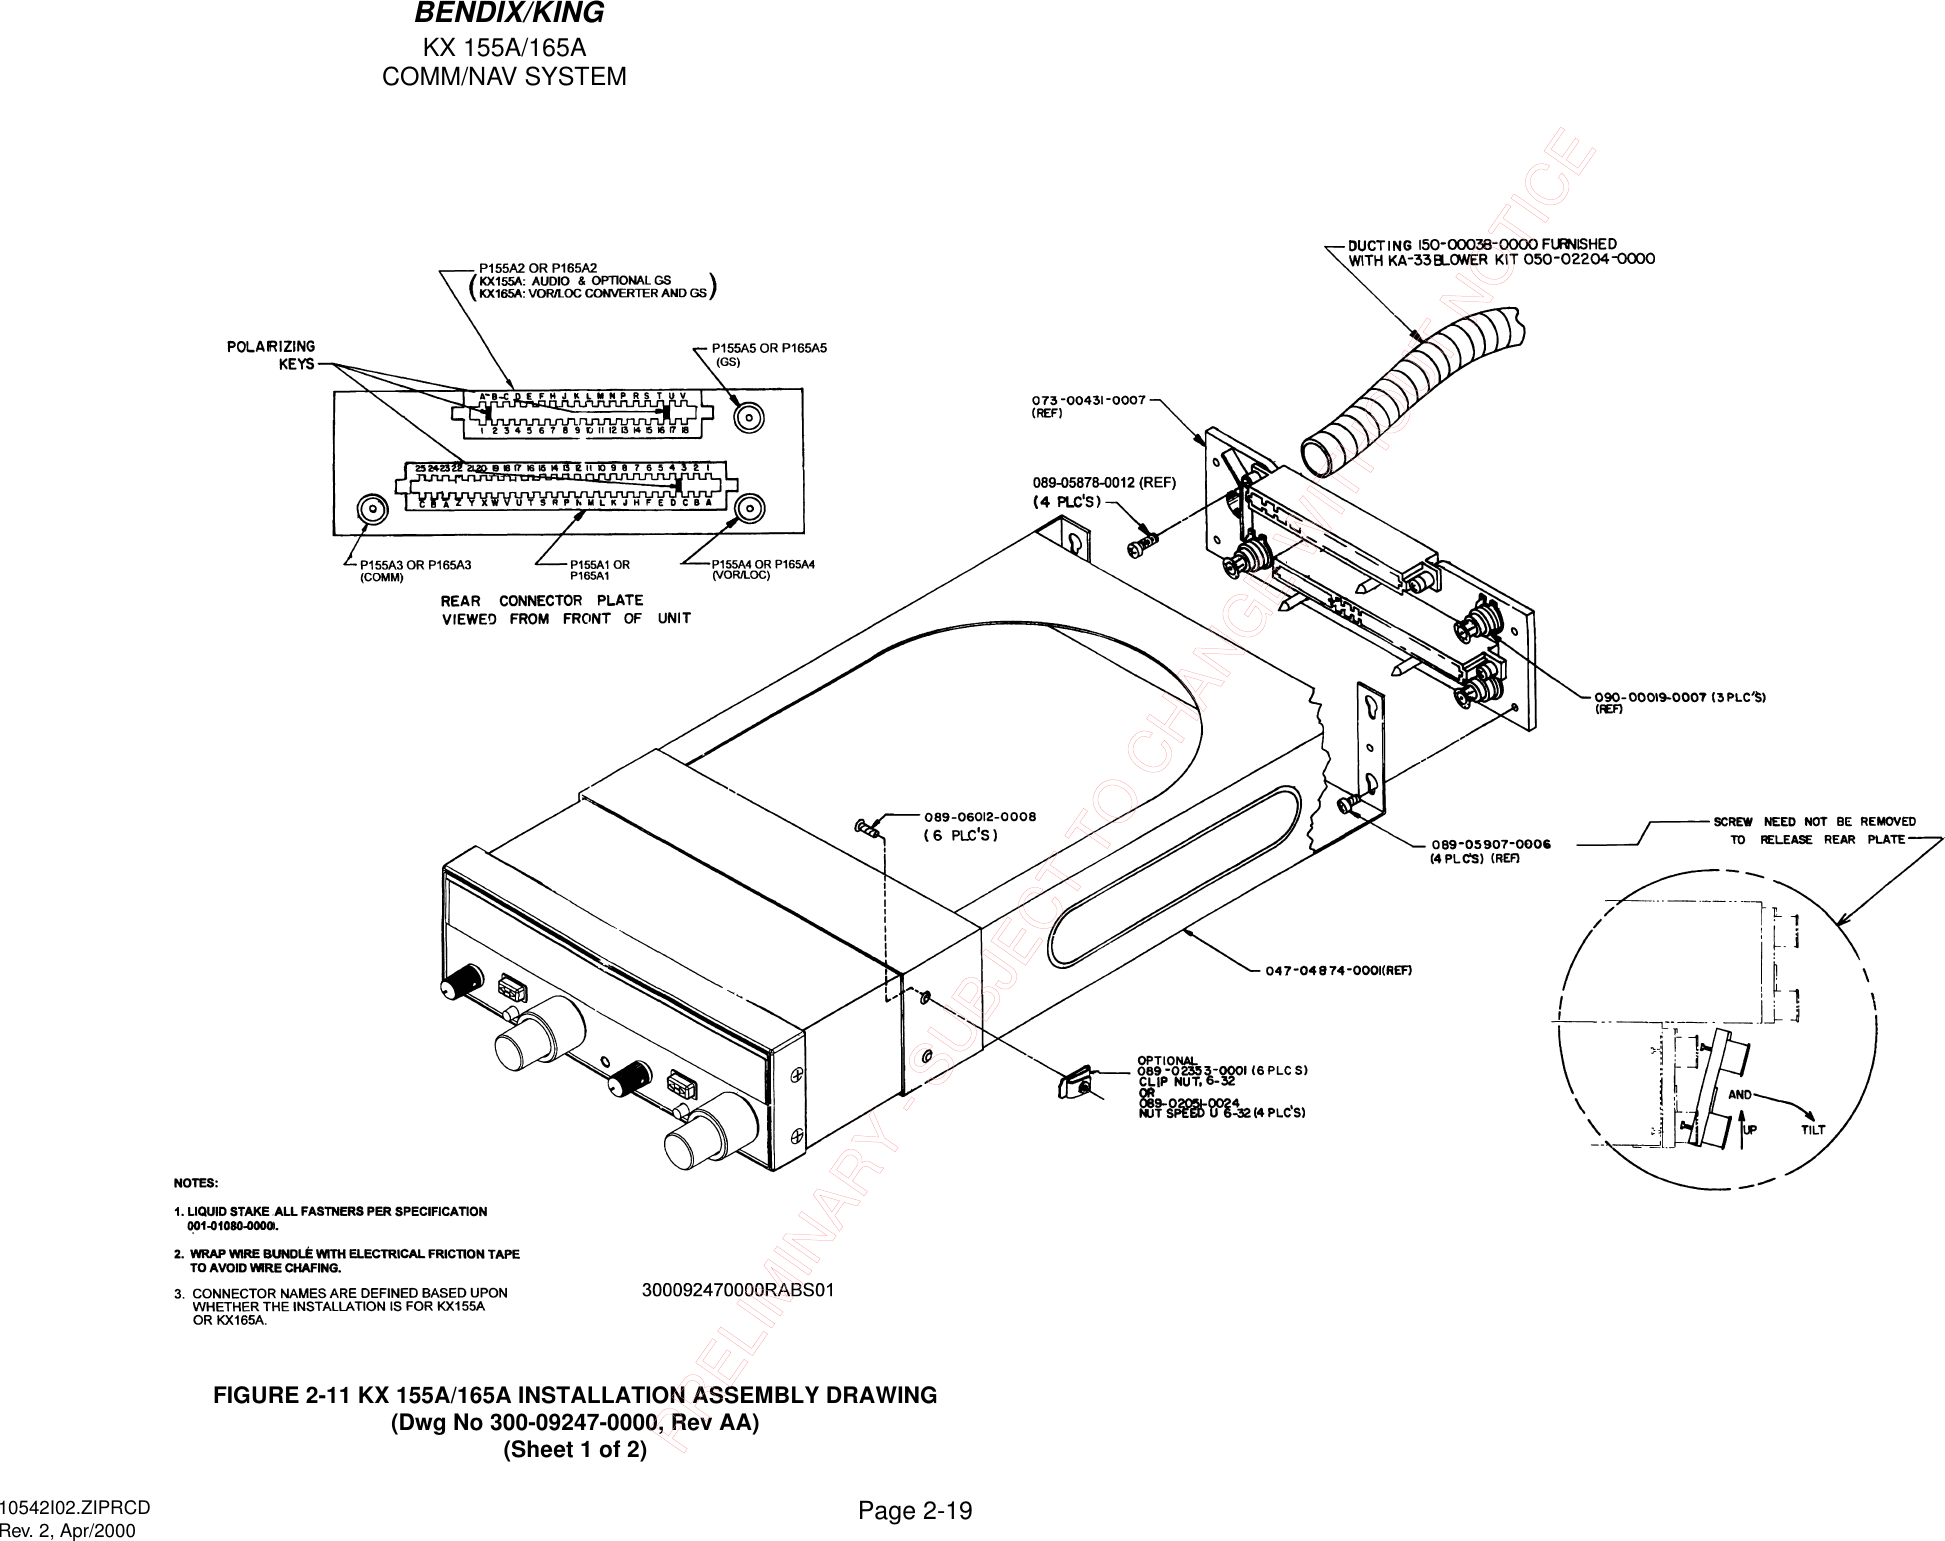 KX 155A/165ACOMM/NAV SYSTEMPage 2-19BENDIX/KING10542I02.ZIPRCDRev. 2, Apr/2000FIGURE 2-11 KX 155A/165A INSTALLATION ASSEMBLY DRAWING(Dwg No 300-09247-0000, Rev AA)(Sheet 1 of 2)PRELIMINARY - SUBJECT TO CHANGE WITHOUT NOTICE